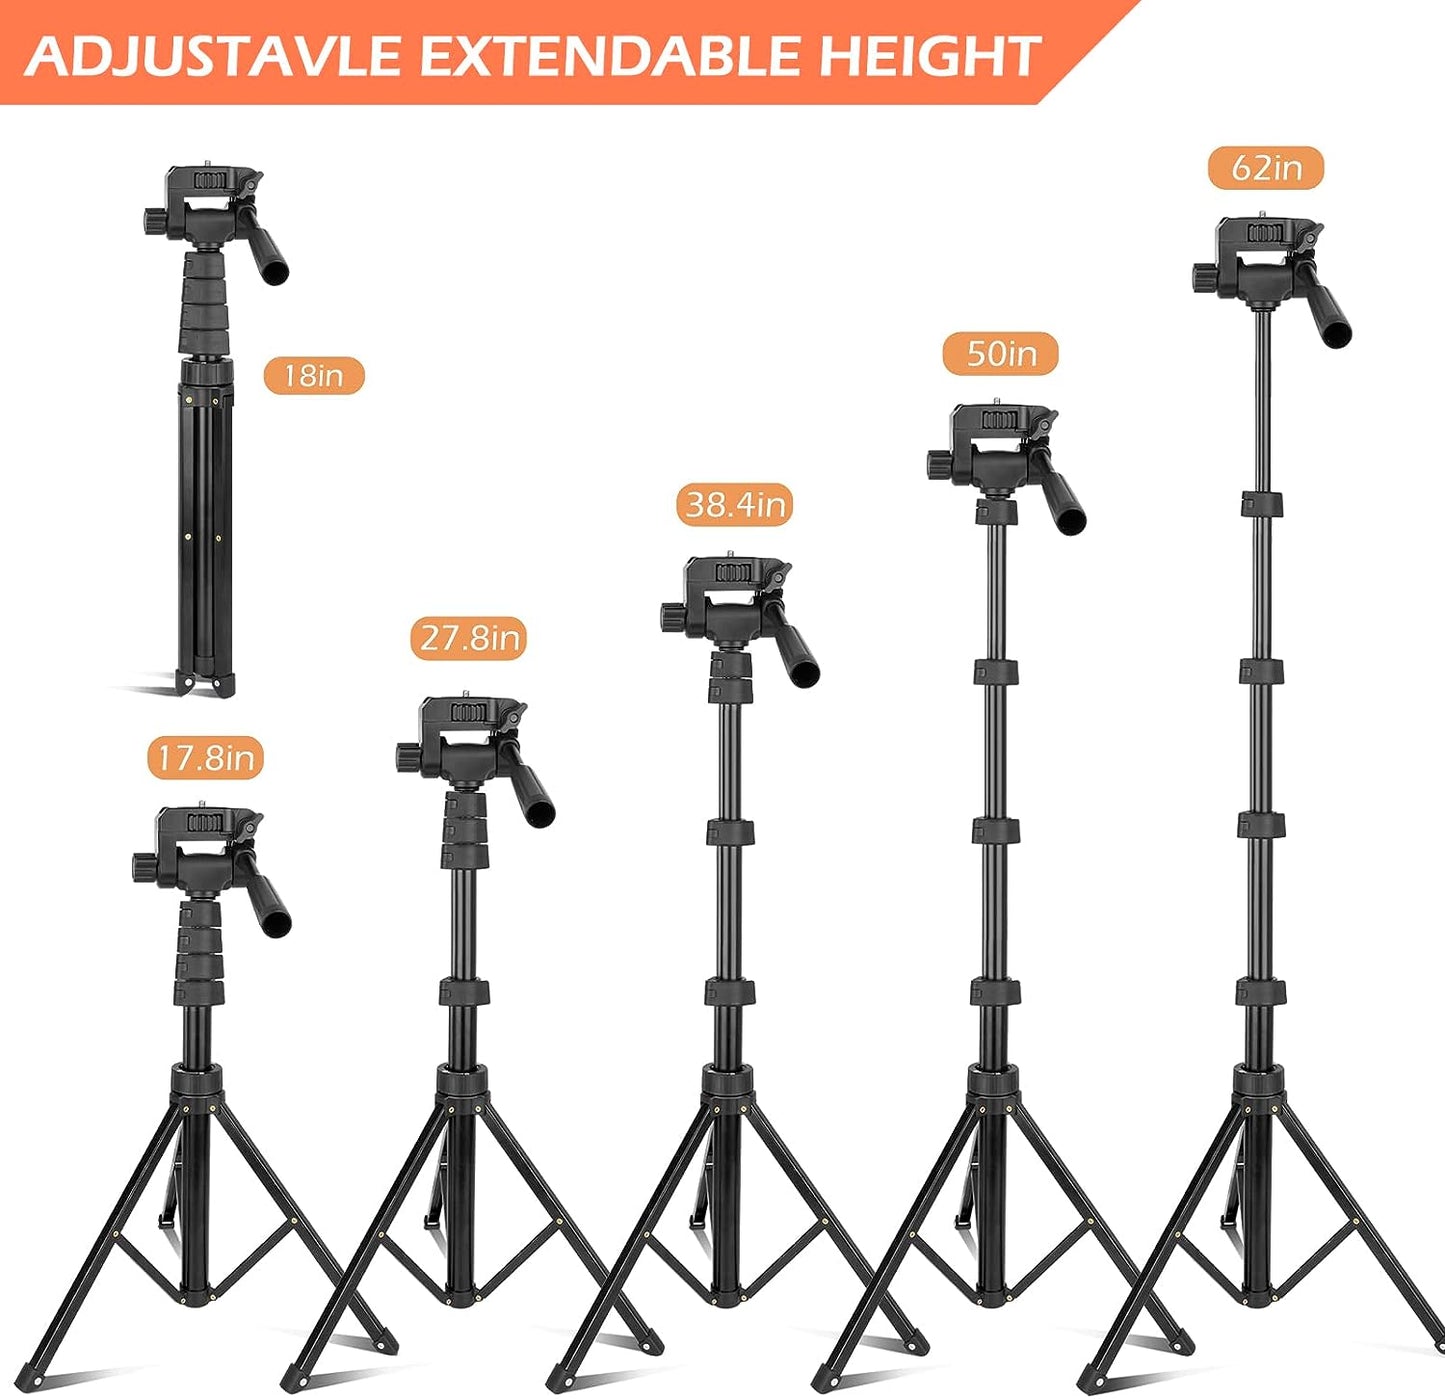 Smart 67" Phone Tripod&Camera Stand, Selfie Stick Tripod with Remote and Phone Holder, Perfect for Selfies/Video Recording/Vlogging/Live Streaming